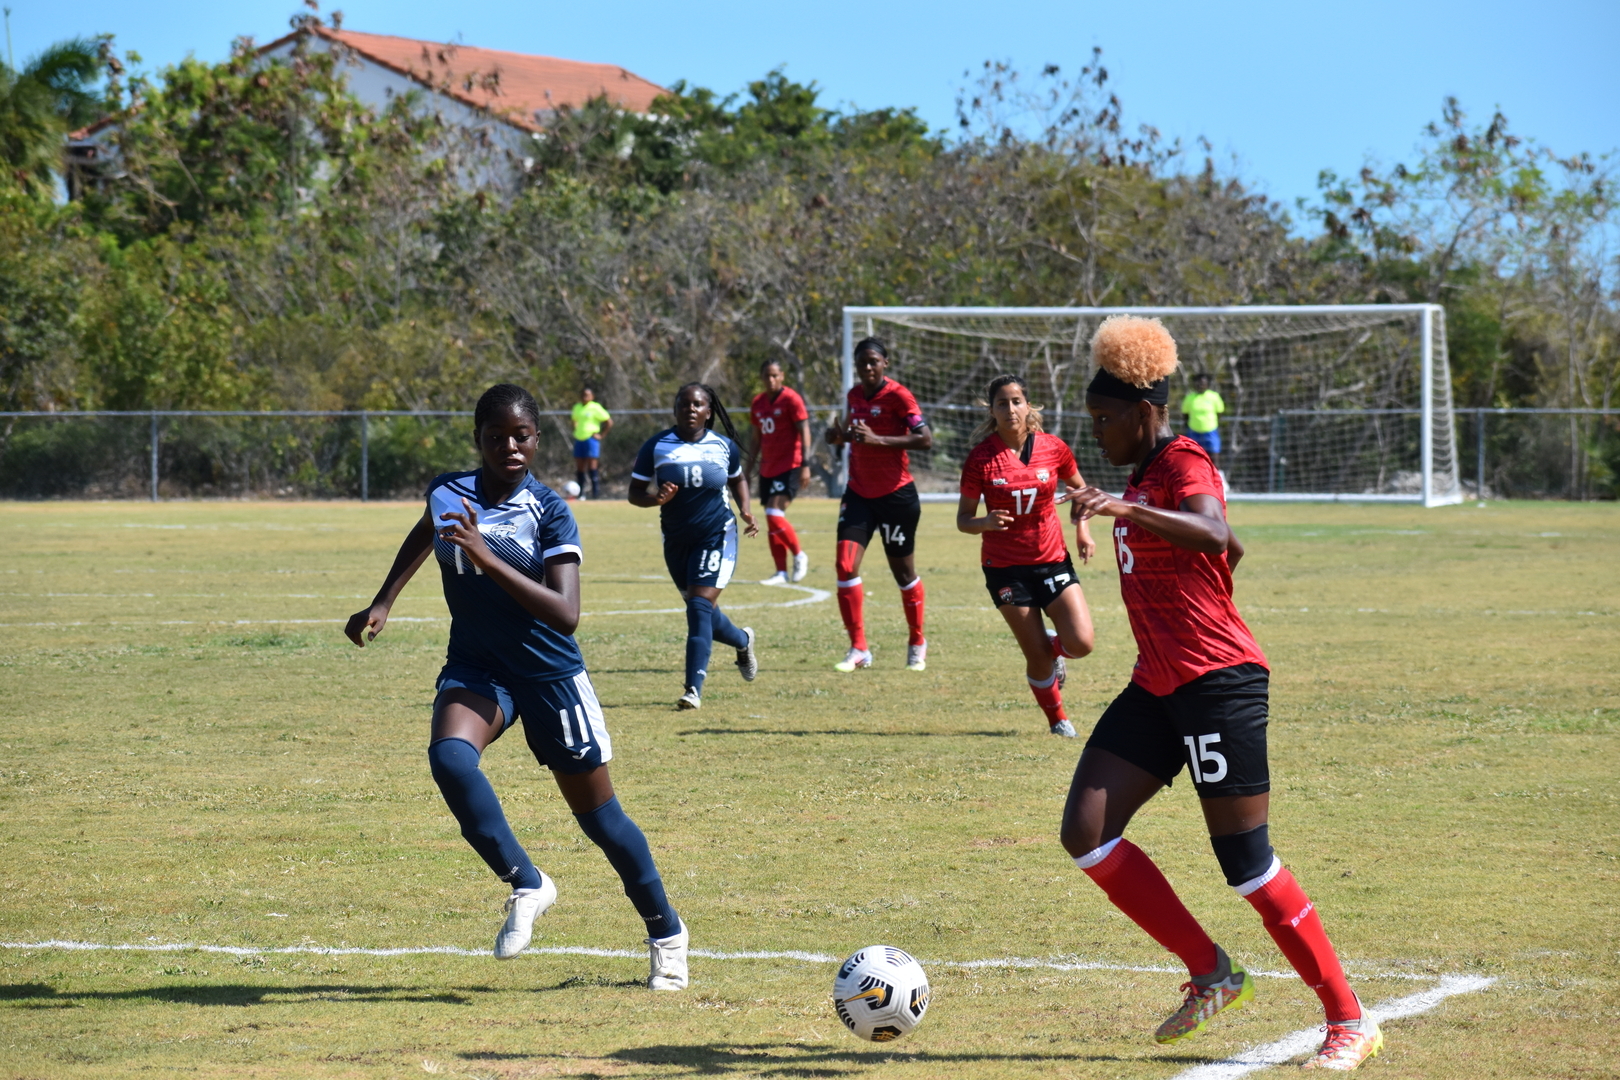 T&T trash Turks & Caicos 13-0 in Women’s World Cup qualifier